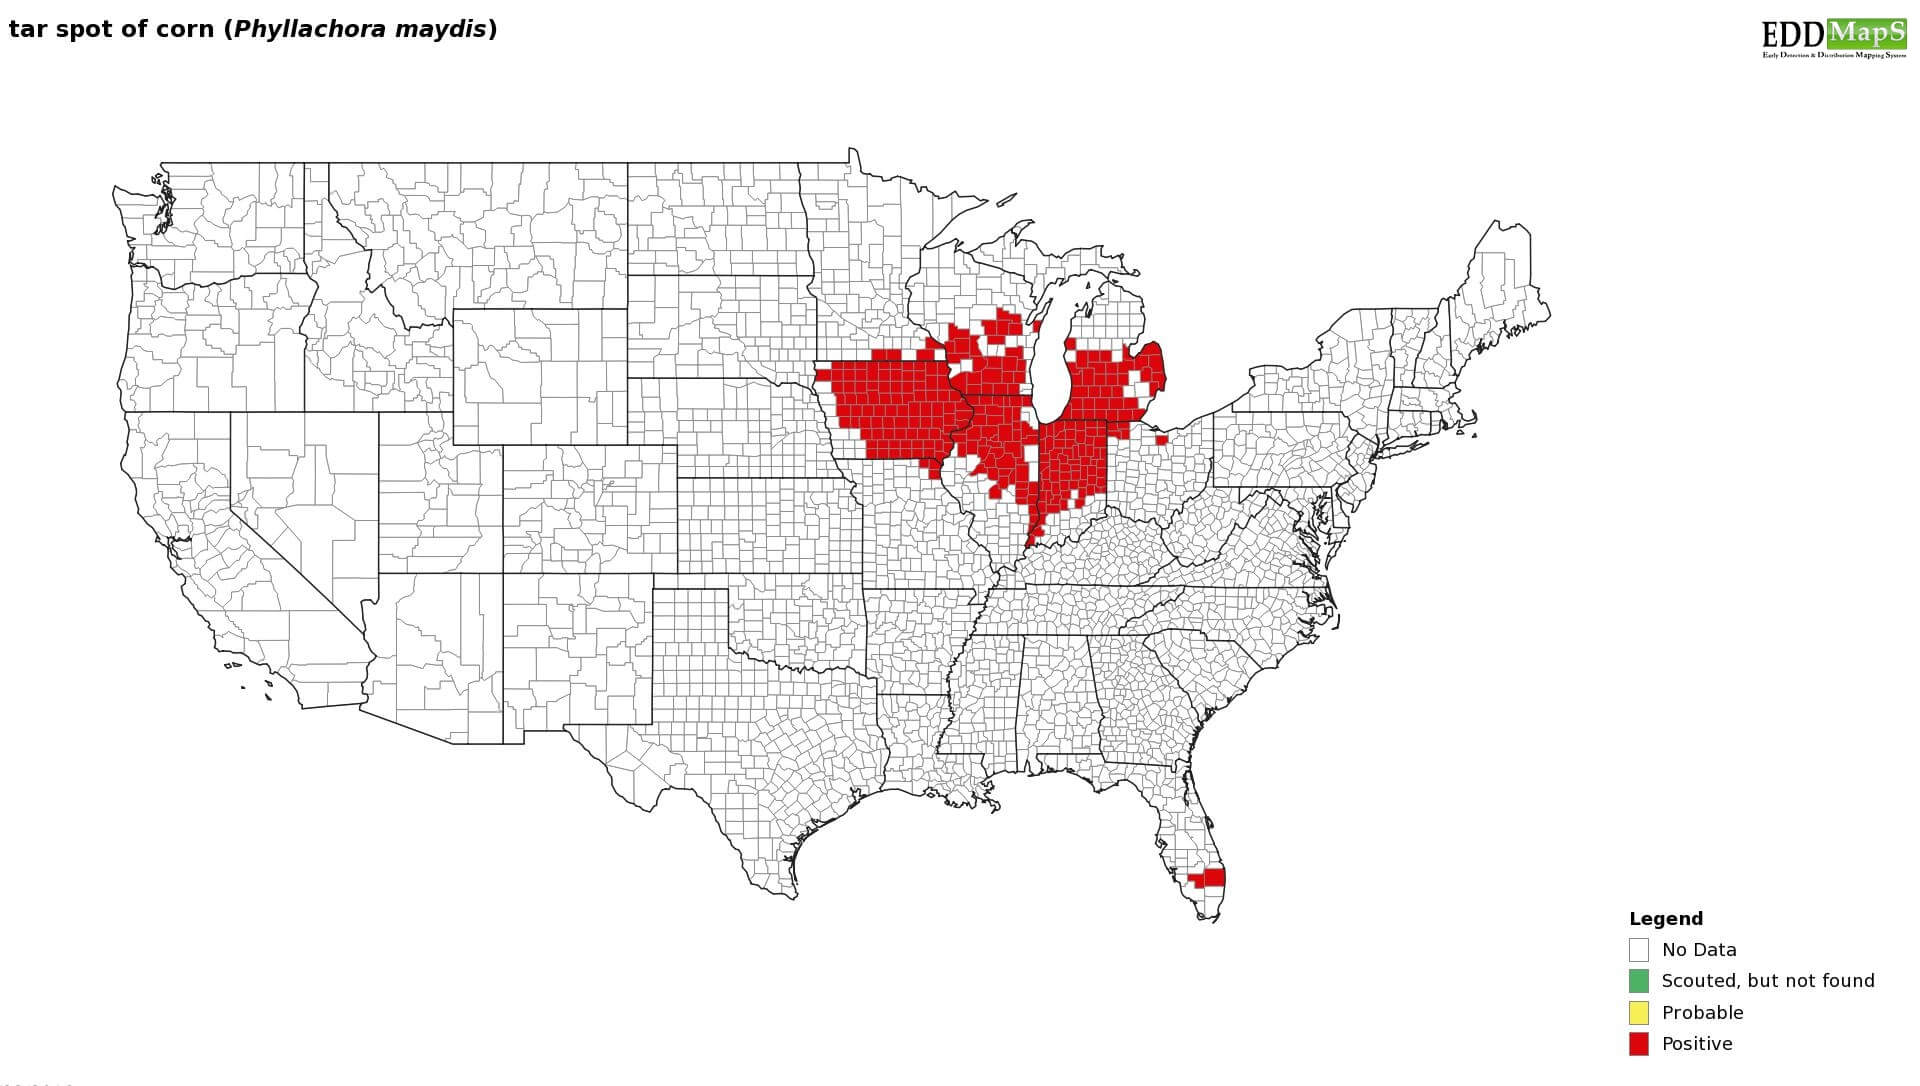 USA map showing spots affected by tar